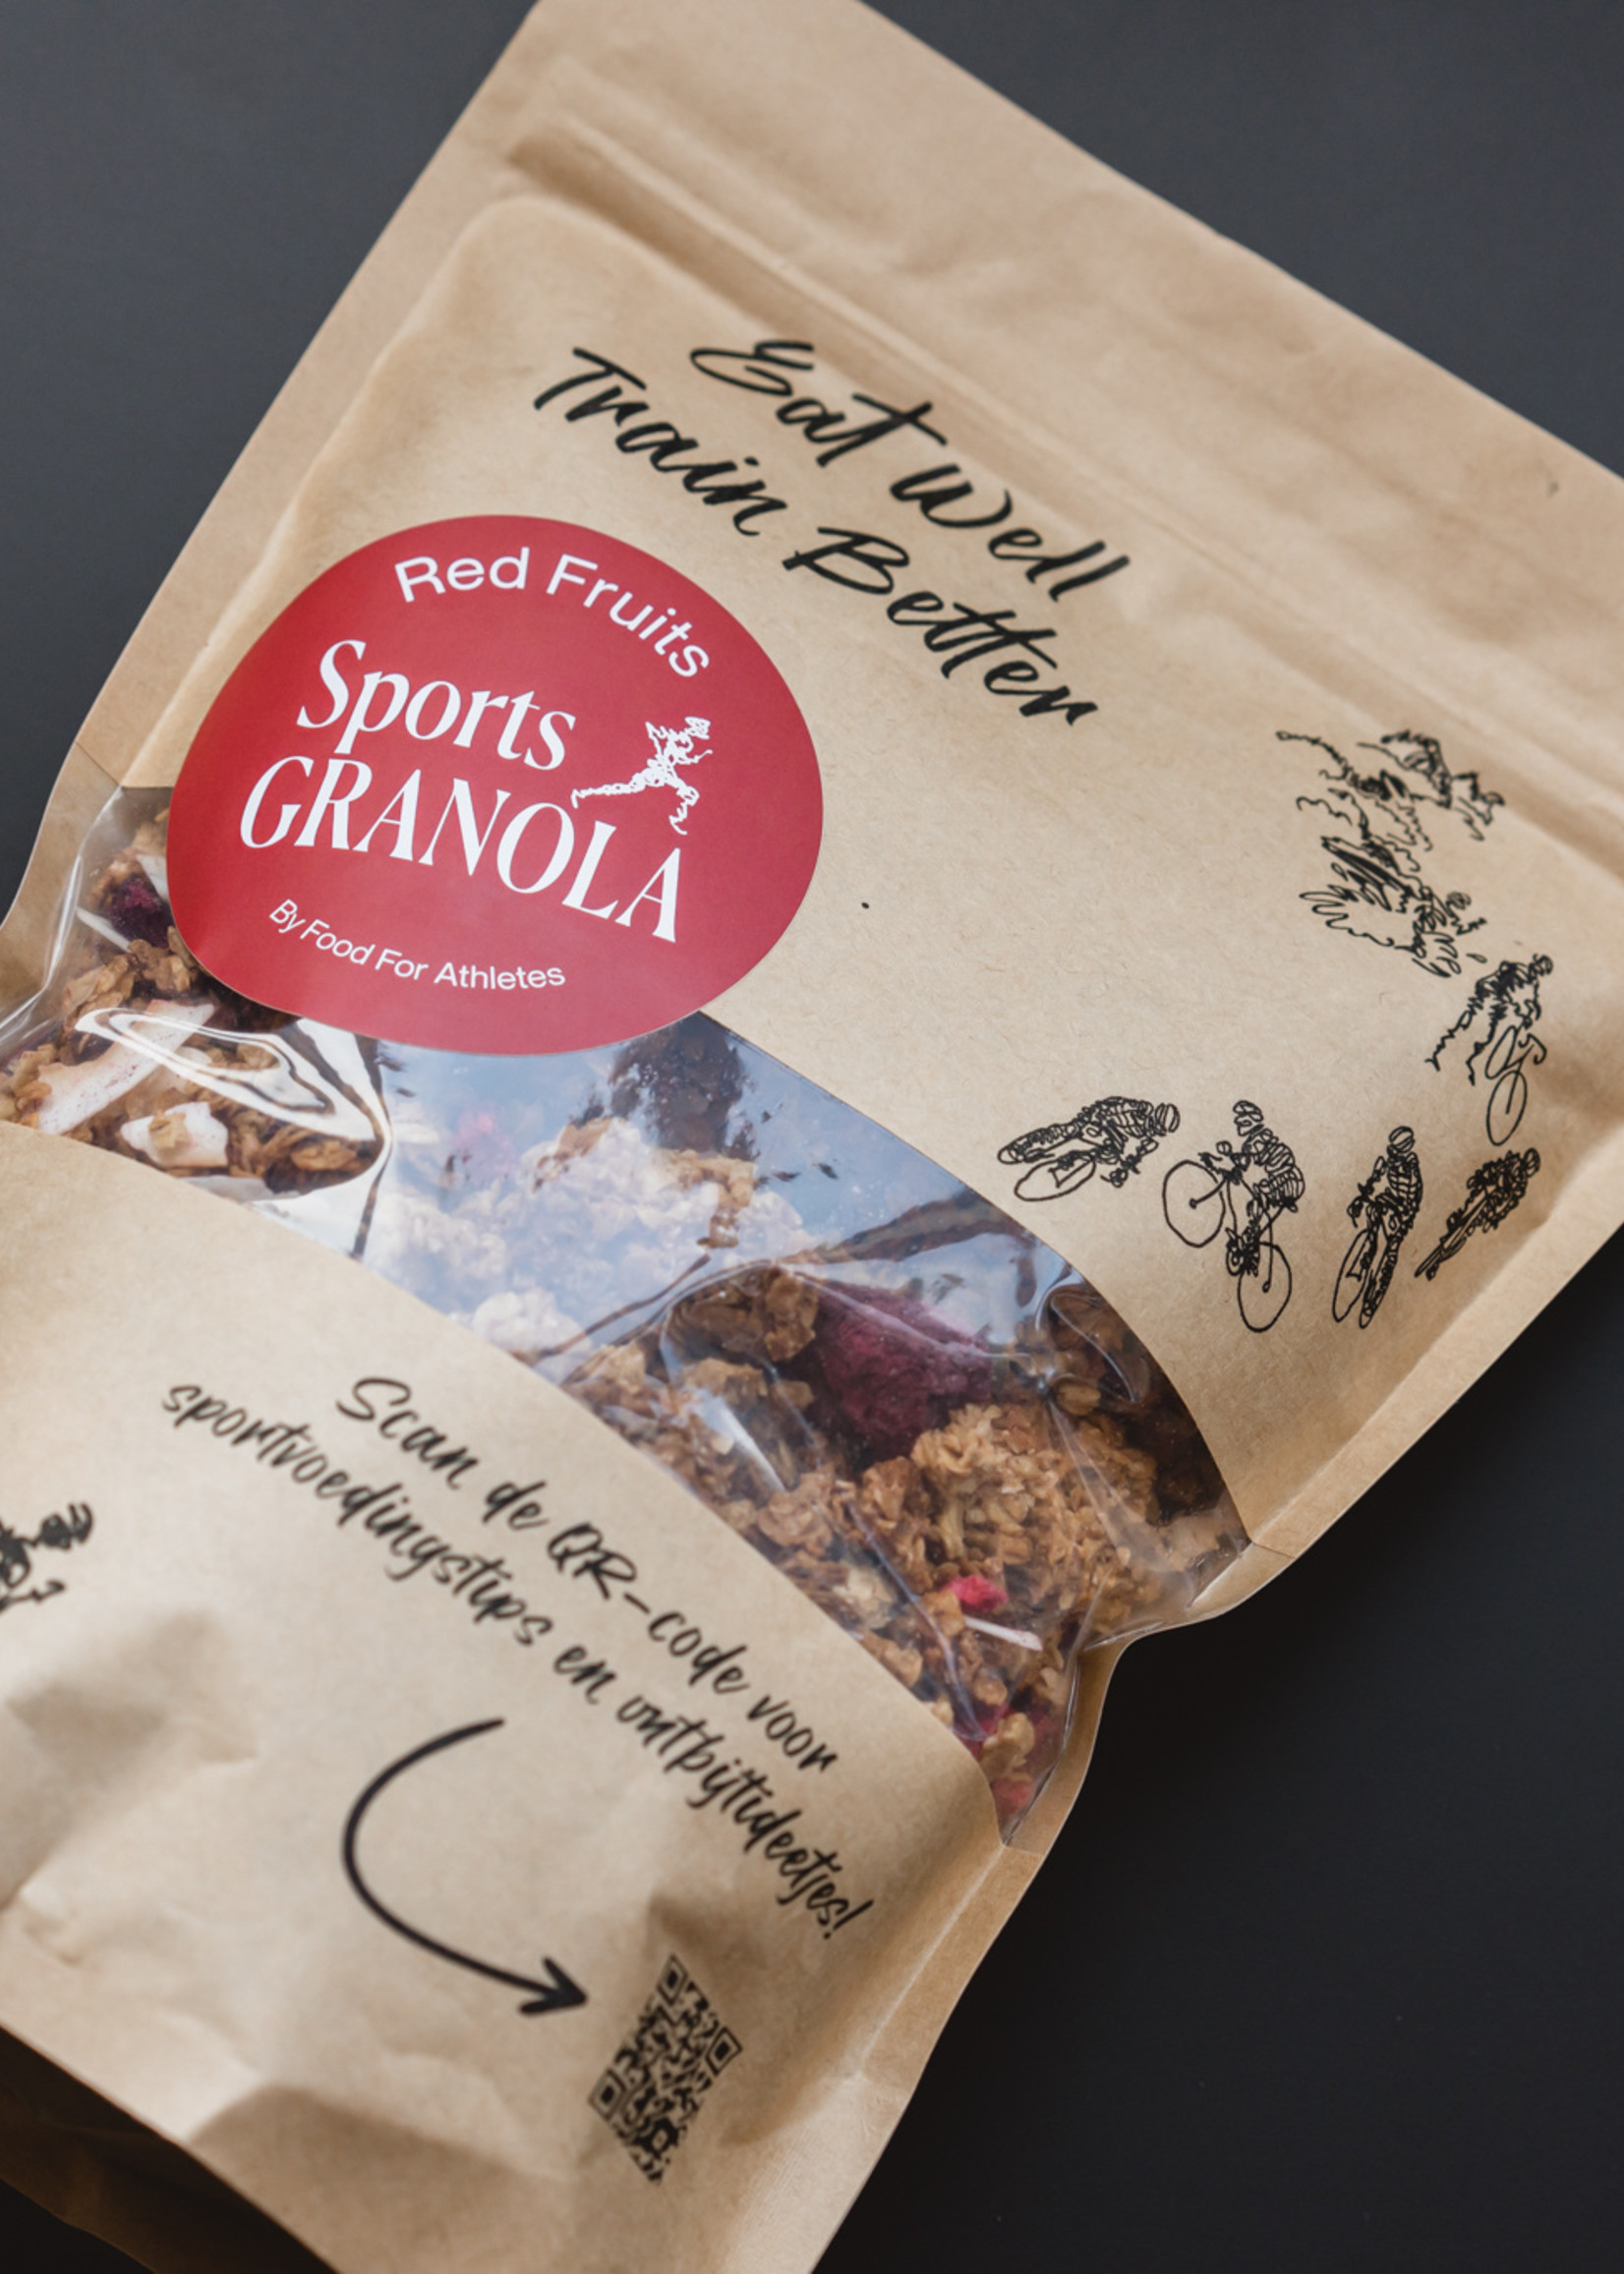 Sports Granola - Red Fruits